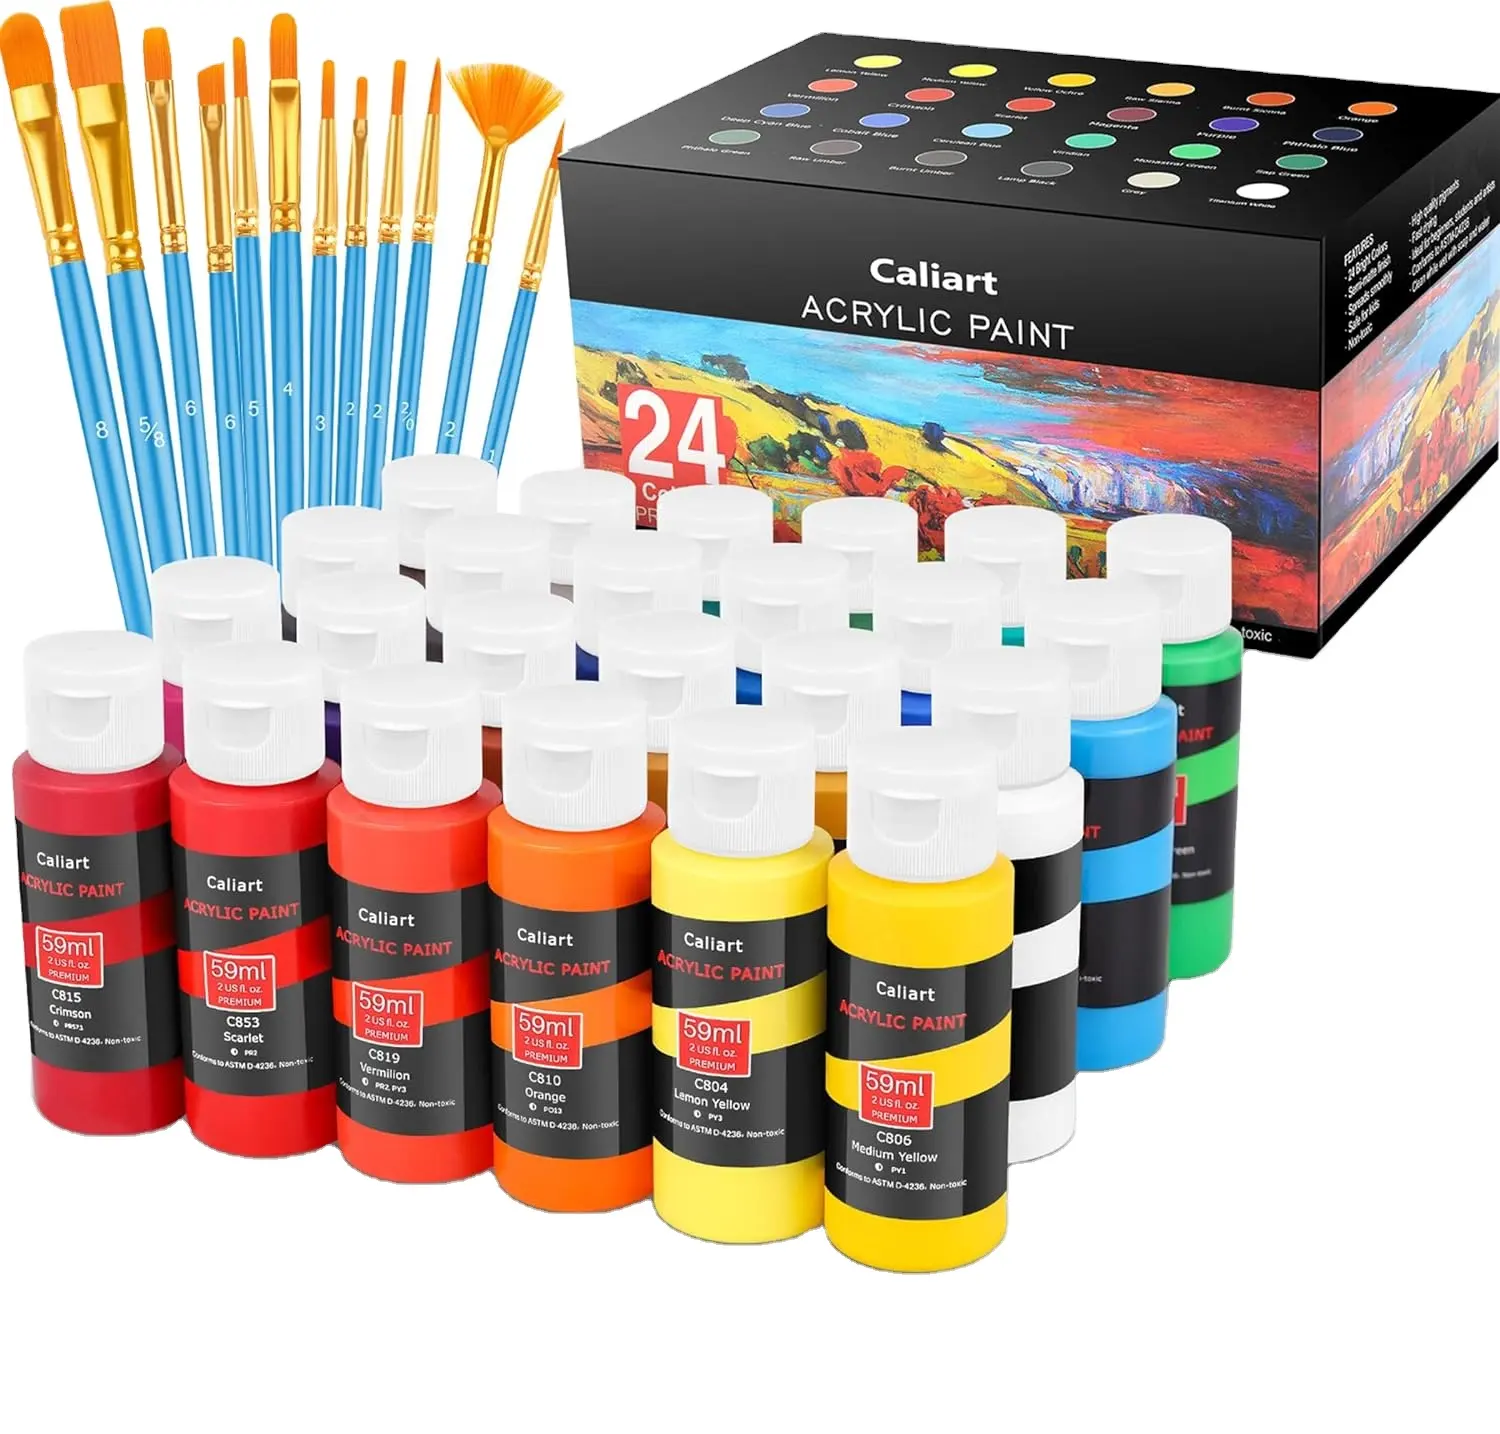 60 ml Acrylic Paint Set 24 Colors Painting Canvas Brushes Price Full Sets Set Acrylic Leather Paints For Shoes